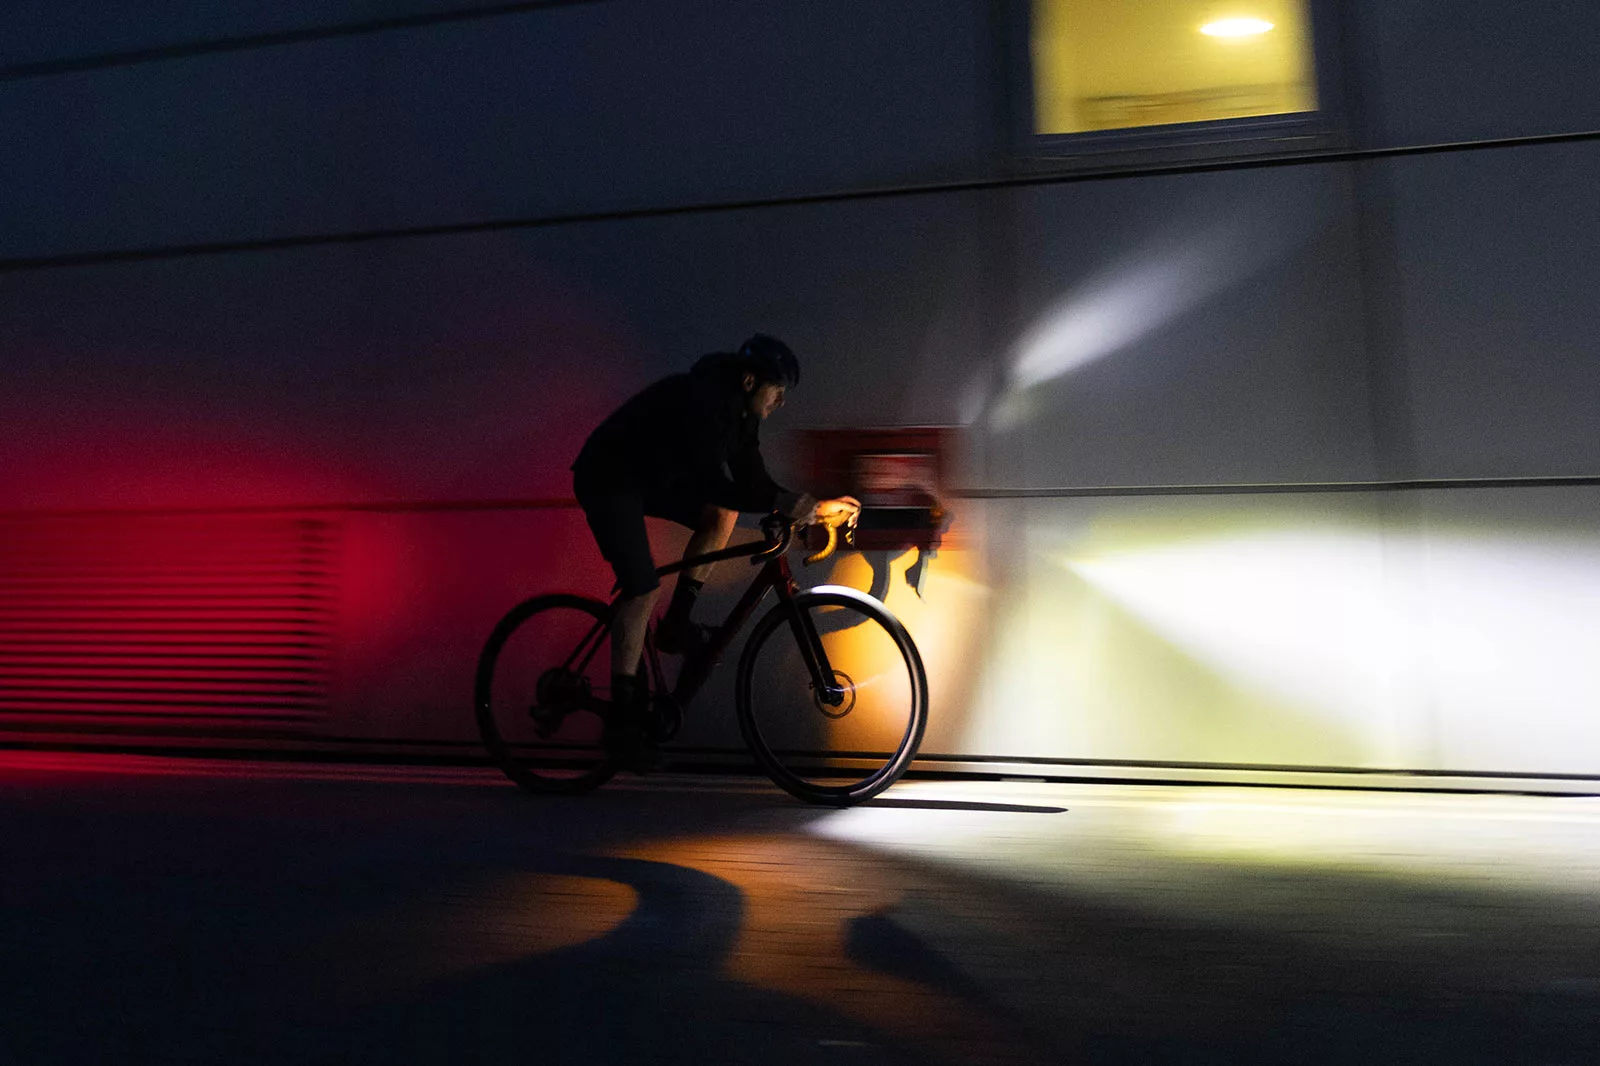 Trek Commuter Pro Light shines bright without blinding oncoming